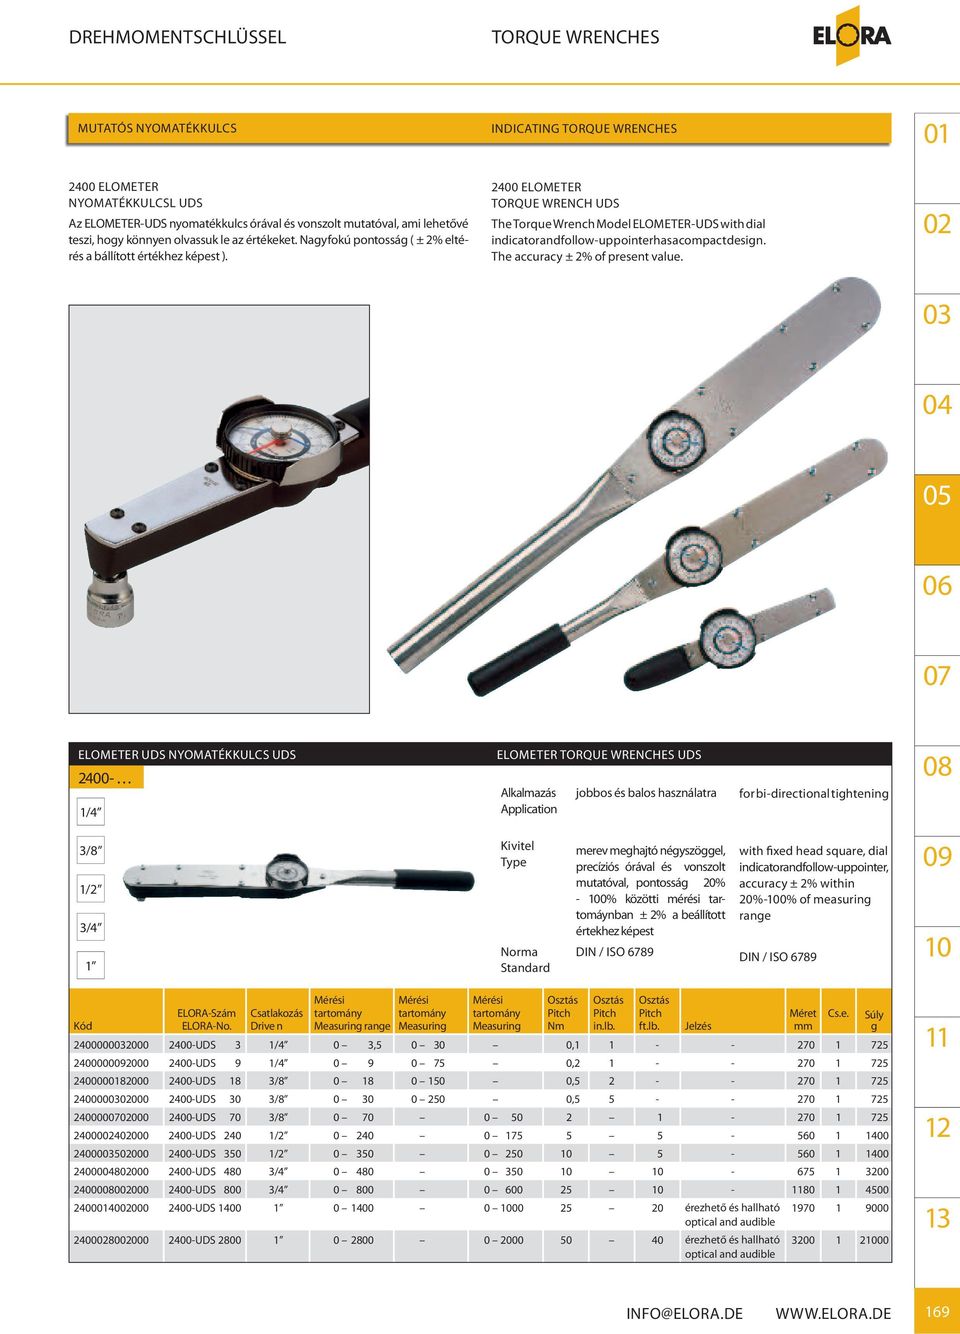 INDICATING 2400 ELOMETER TORQUE WRENCH UDS The Torque Wrench Model ELOMETER-UDS with dial indicator and follow-up pointer has a compact desin. The accuracy ± 2% of present value.